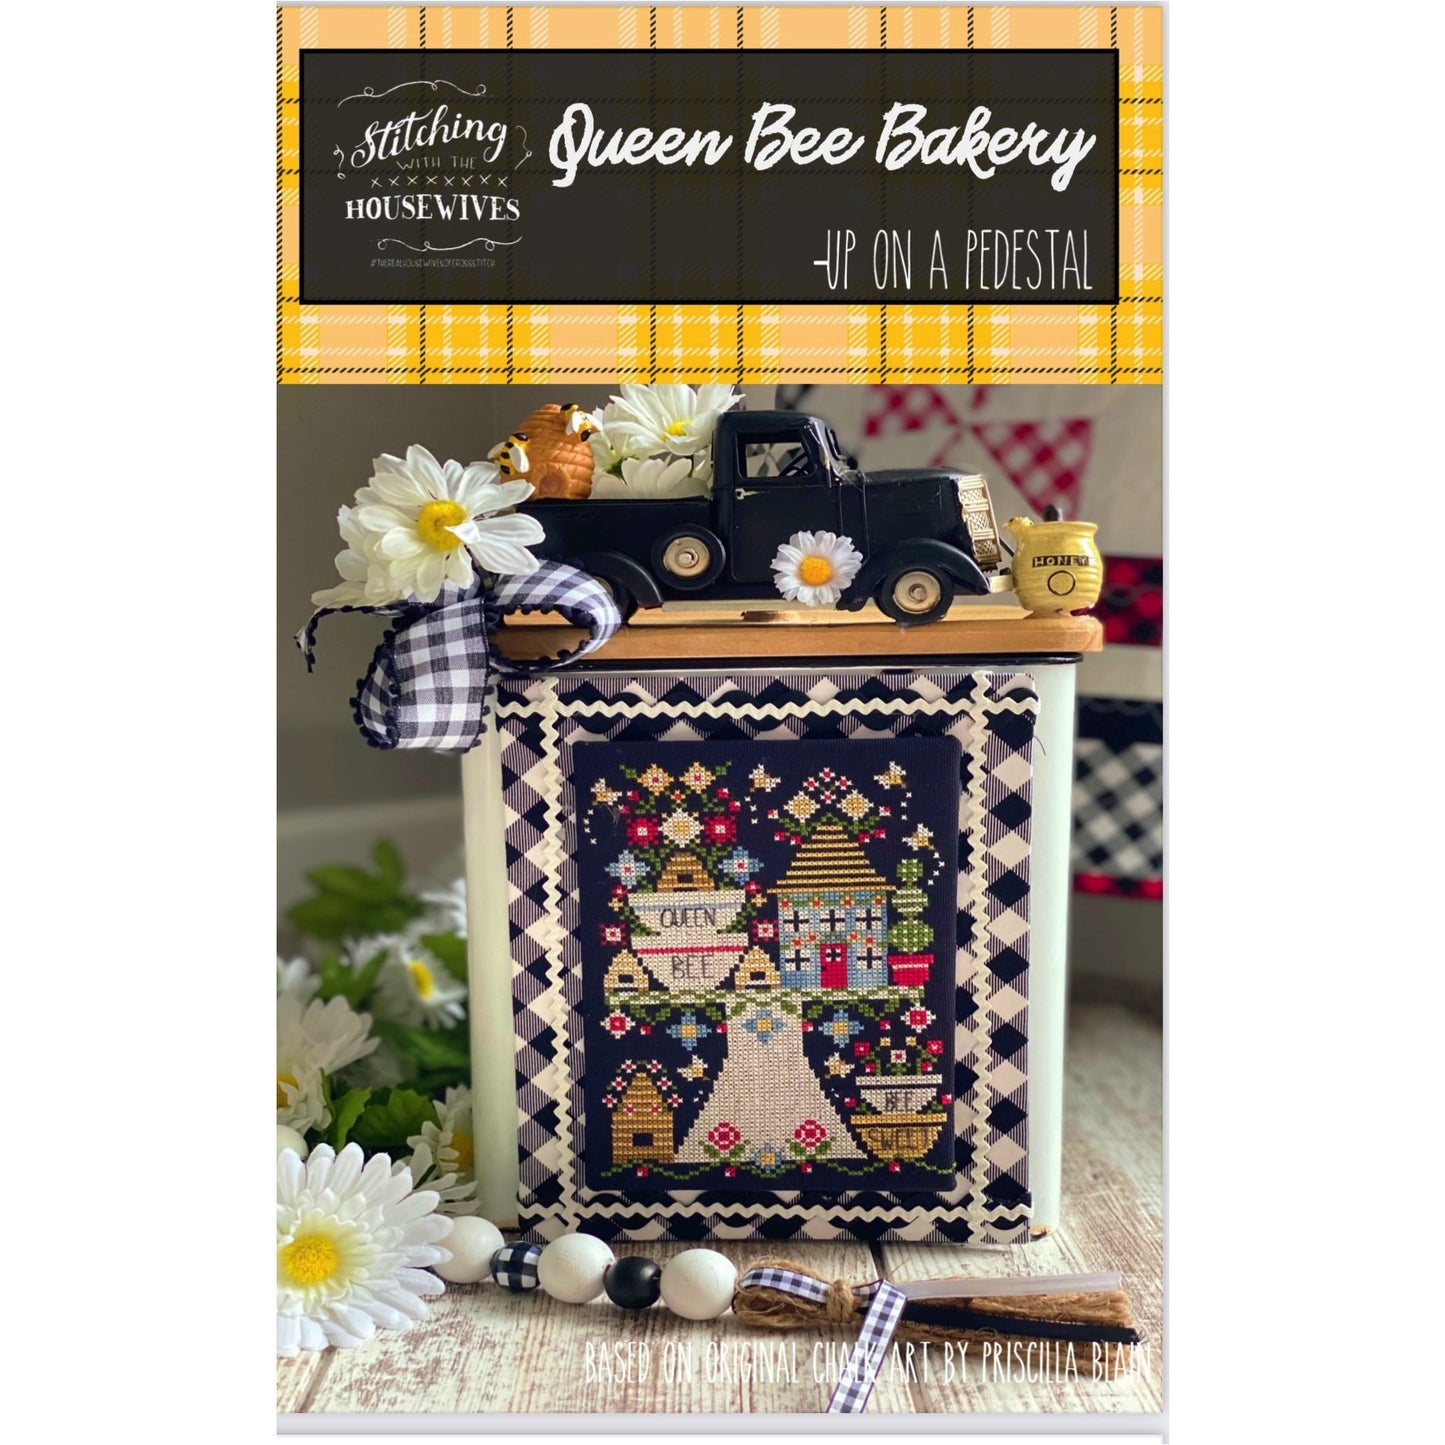 Stitching Housewives ~ Queen Bee Bakery Pattern